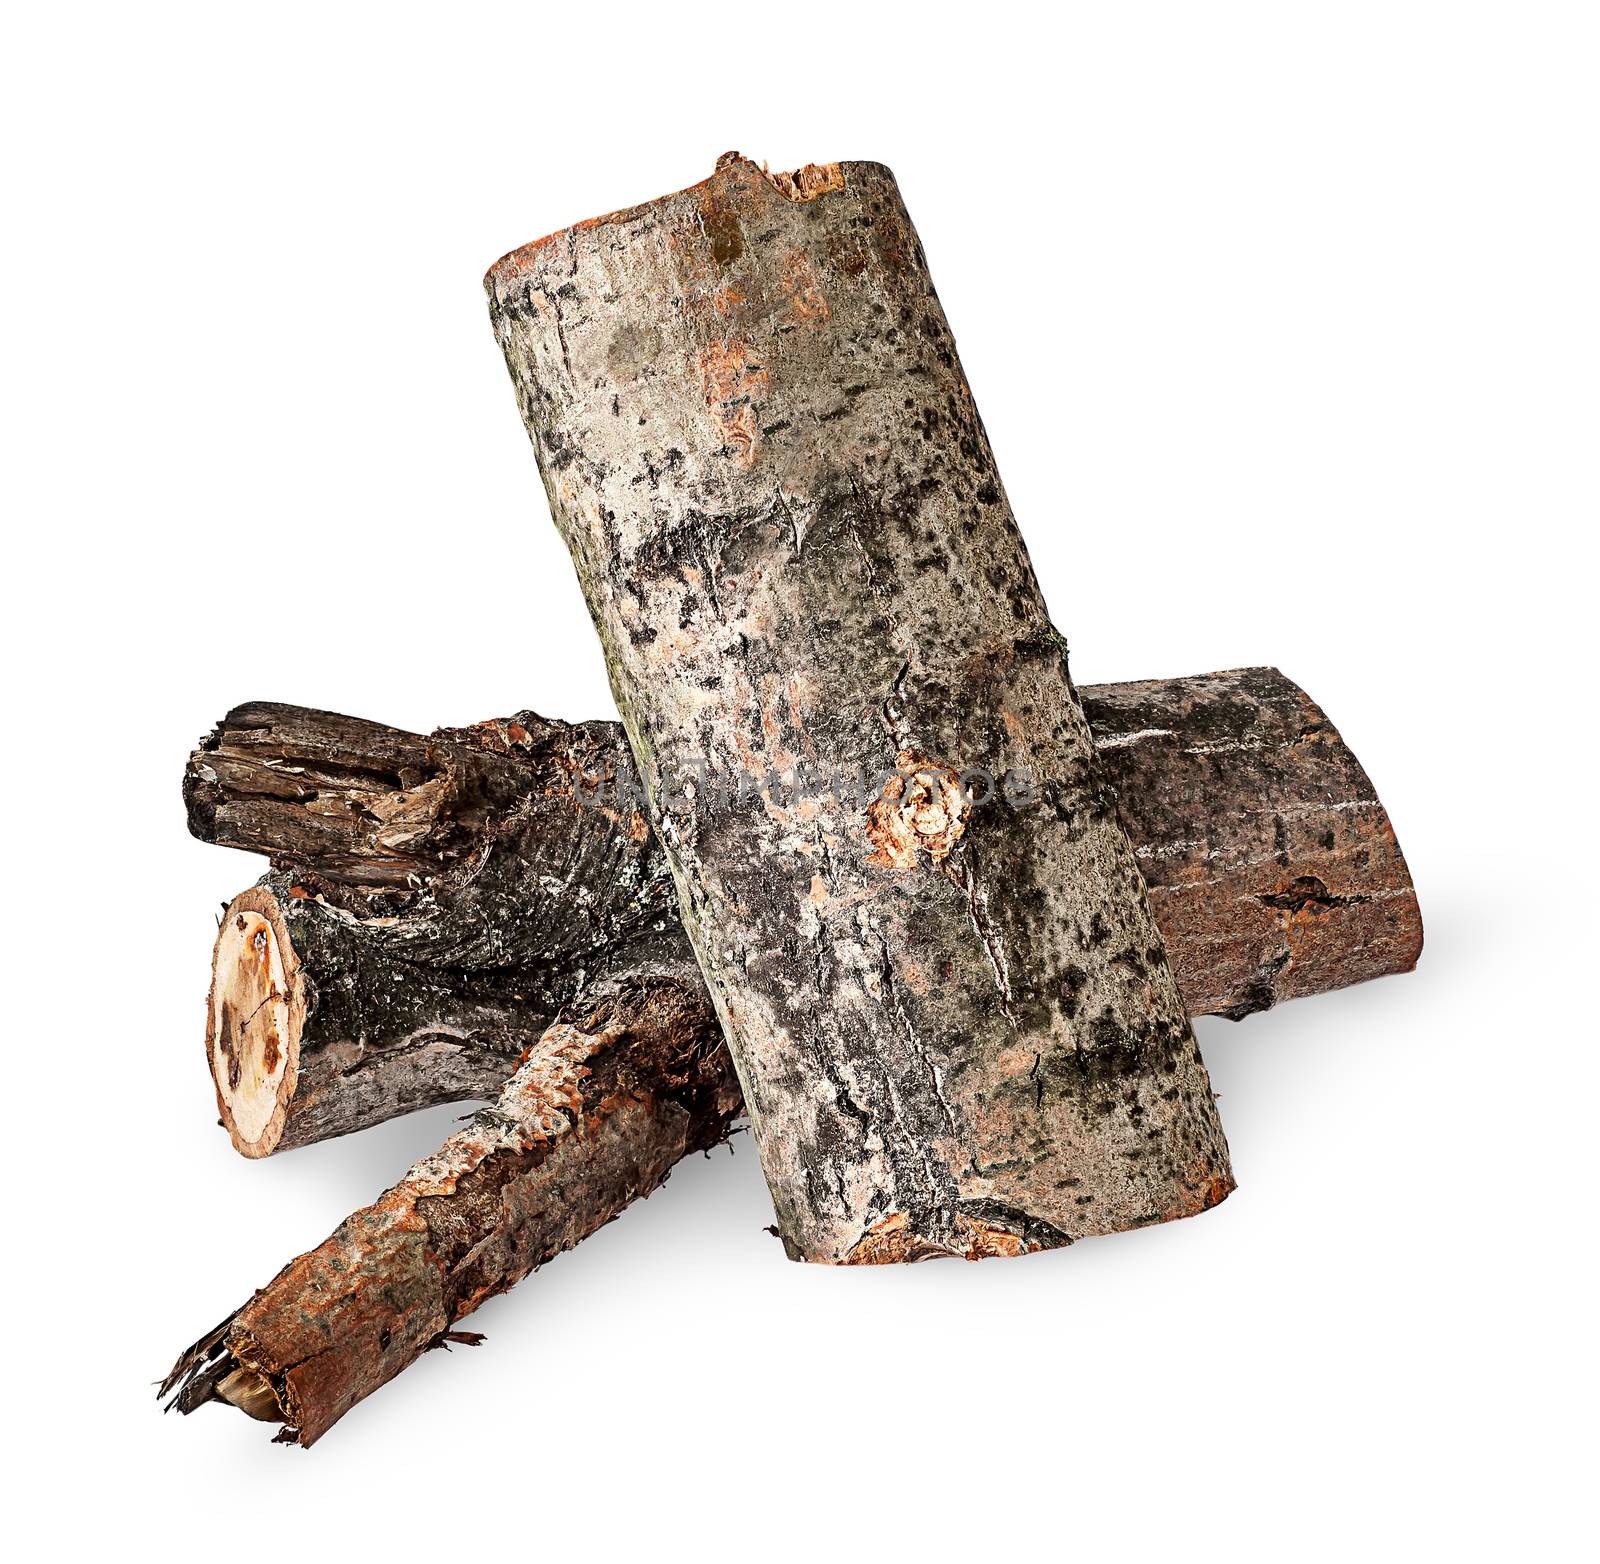 Two poplar logs isolated on white background